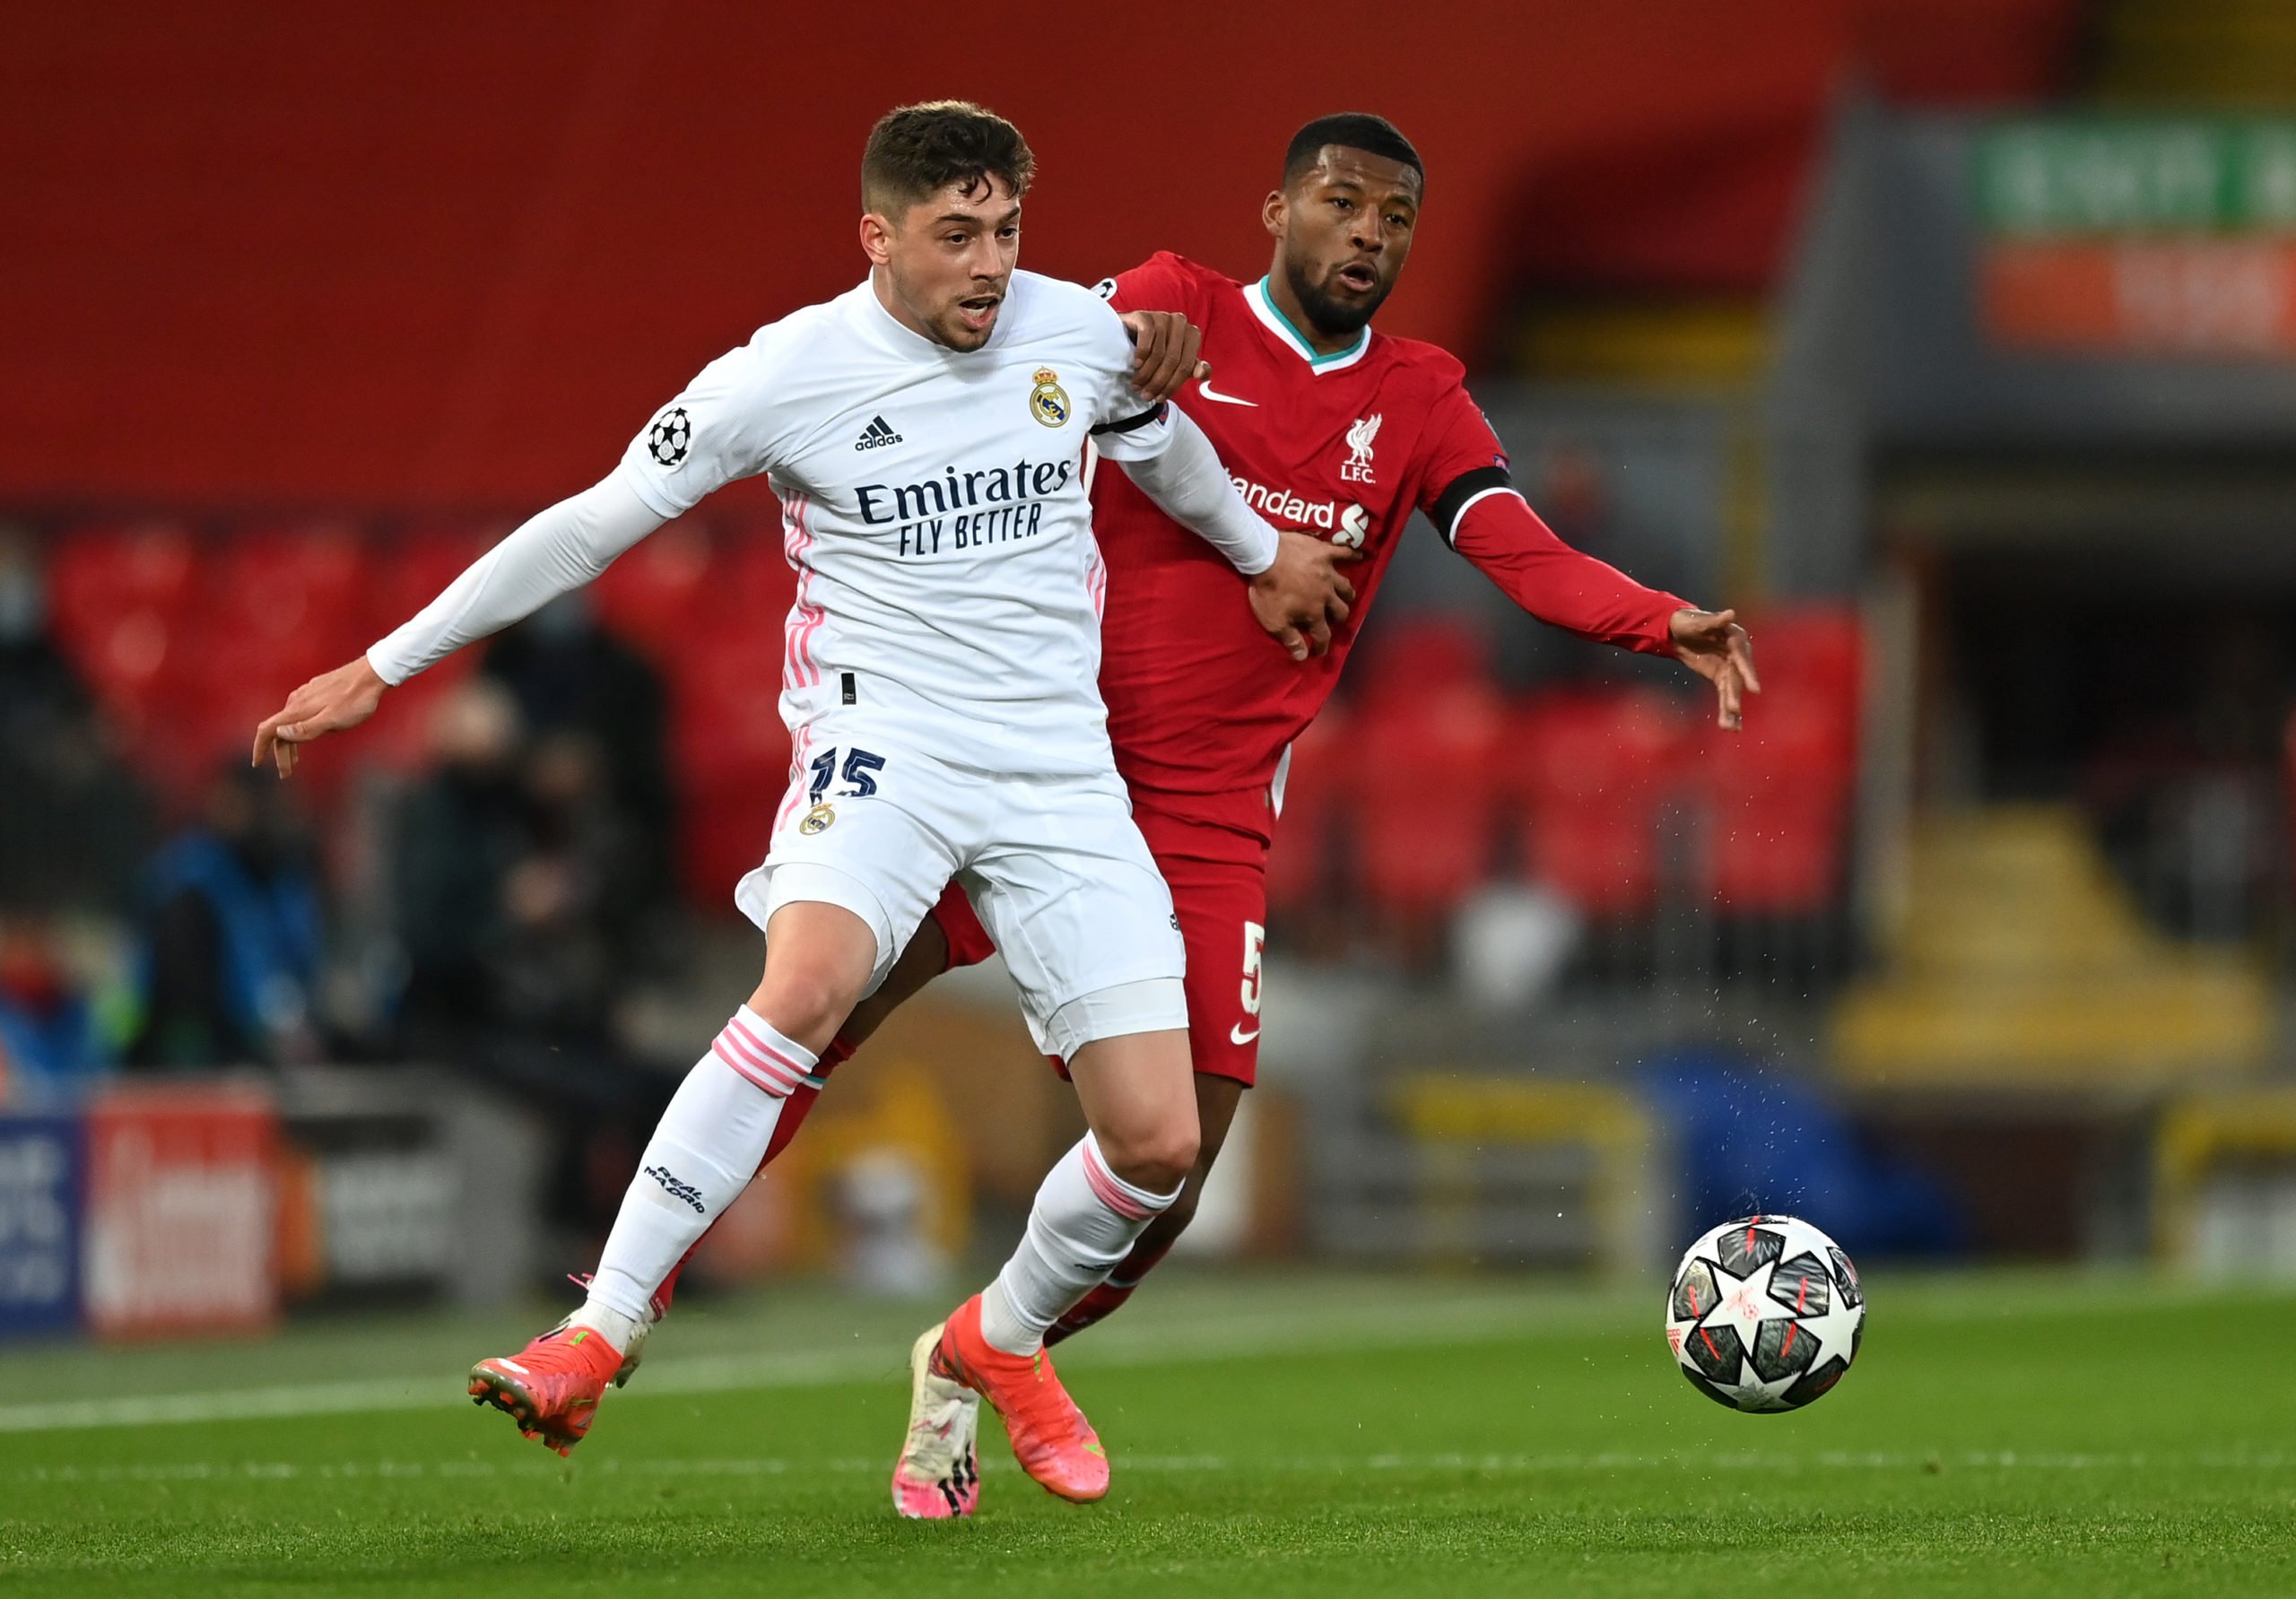 LIVERPOOL, ENGLAND - APRIL 14: Federico Valverde of Real Madrid battles for possession with Georginio Wijnaldum of Liverpool during the UEFA Champions League Quarter Final Second Leg match between Liverpool FC and Real Madrid at Anfield on April 14, 2021 in Liverpool, England. Sporting stadiums around the UK remain under strict restrictions due to the Coronavirus Pandemic as Government social distancing laws prohibit fans inside venues resulting in games being played behind closed doors. (Photo by Shaun Botterill/Getty Images)The 4th Official uses images provided by the following image agency: Getty Images (https://www.gettyimages.de/) Imago Images (https://www.imago-images.de/)